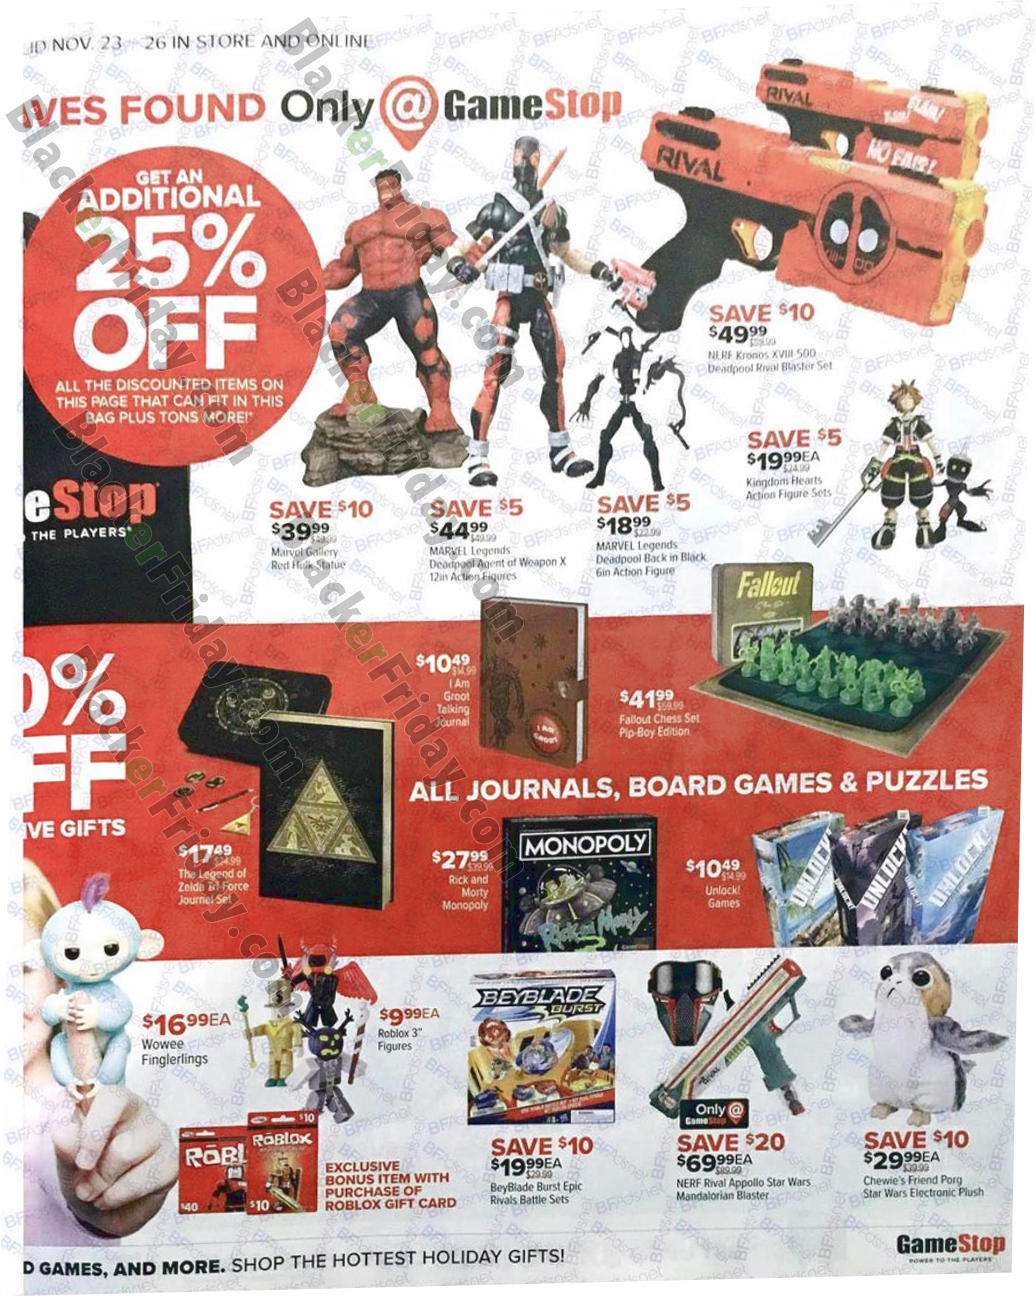 Gamestop Black Friday 2020 Sale What To Expect Blacker Friday